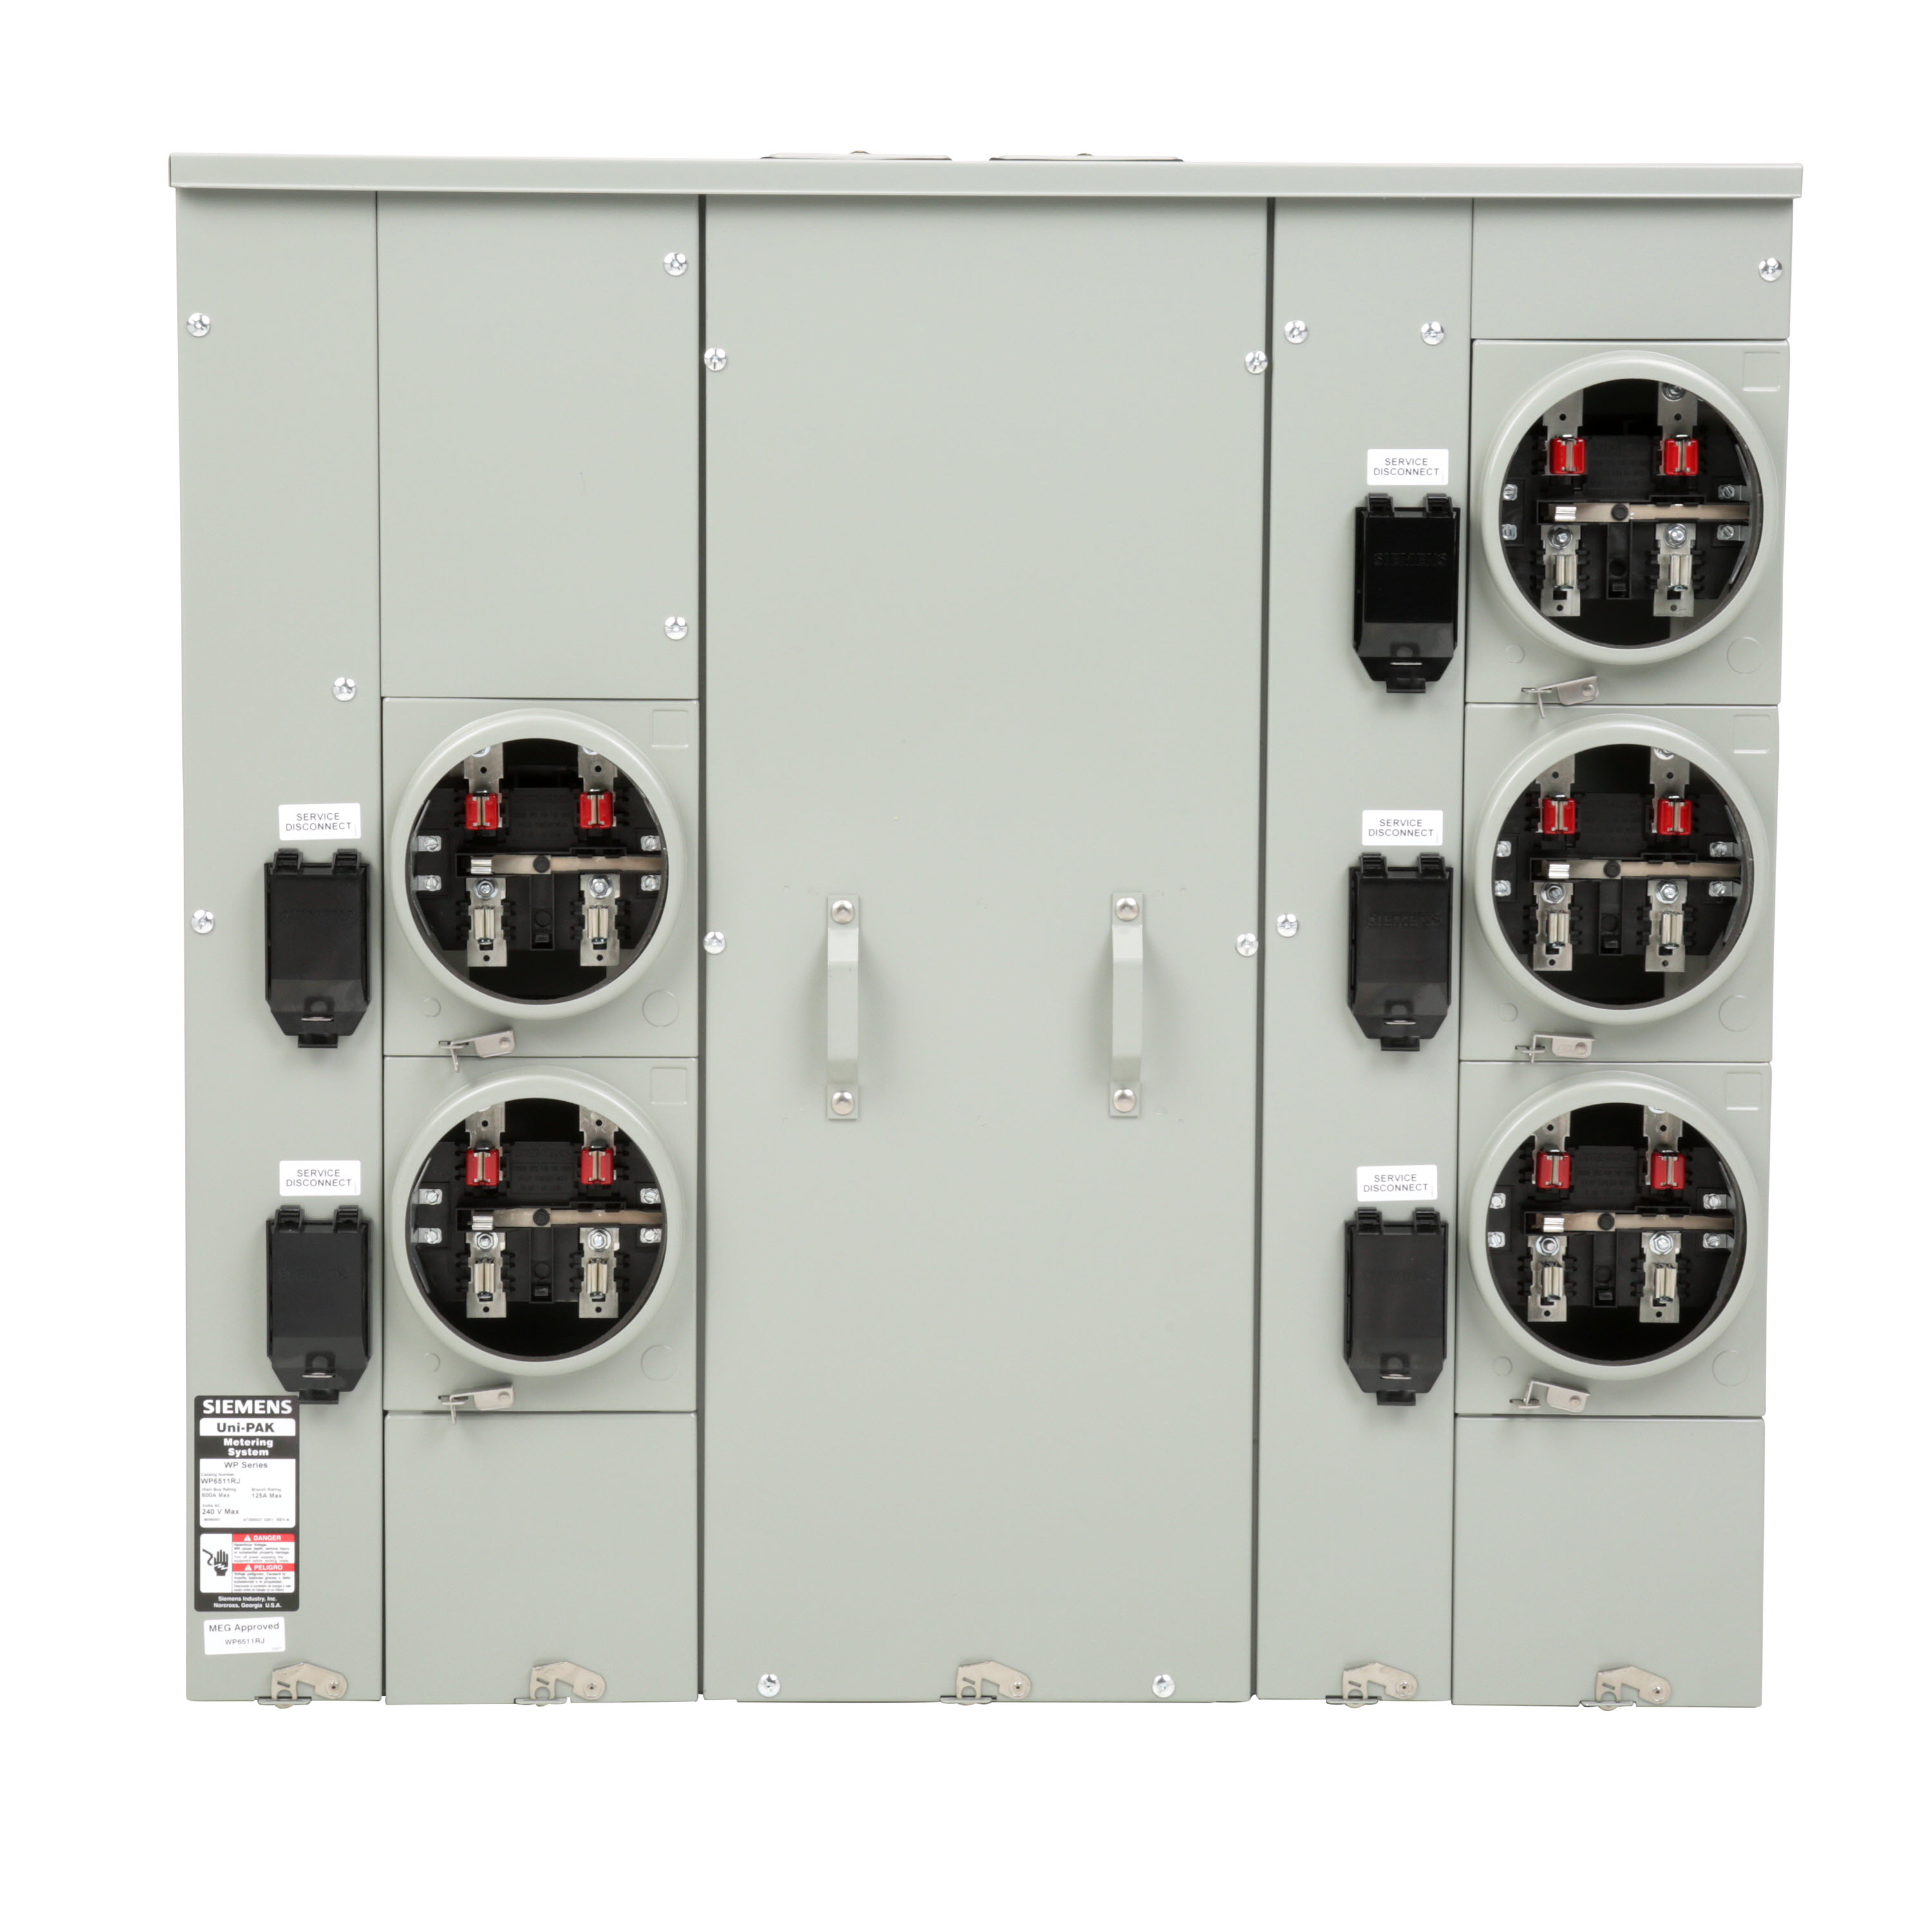 Siemens Low Voltage s Multi-Family Metering Line of PAK Metering Standard 125A as part of the PAK Metering Standard 125A Group. Type UNI-PAK Features NO BYPASSAppn GARDEN - STYLE Std UL-50,67,414 V. Rating 120/240V A. Rating 600A Phase 1PH Size 9.000x45.07 x 39.690 No. Of Cutouts 17 Cutout Size 1 x (1/2,3/4,1,1-1/4 ), 12 x (2-1/2,2 ,1-1/2,1-1/4,1 ), 2 x (4,3-1/2,3,2-1/2,2 ), 2X4 Cable Entry TOP OR BOTTOM FEED Terminal 3X2 STUDS. Insulated.Appn . Wall Mounted. Enclosure RINGLESS